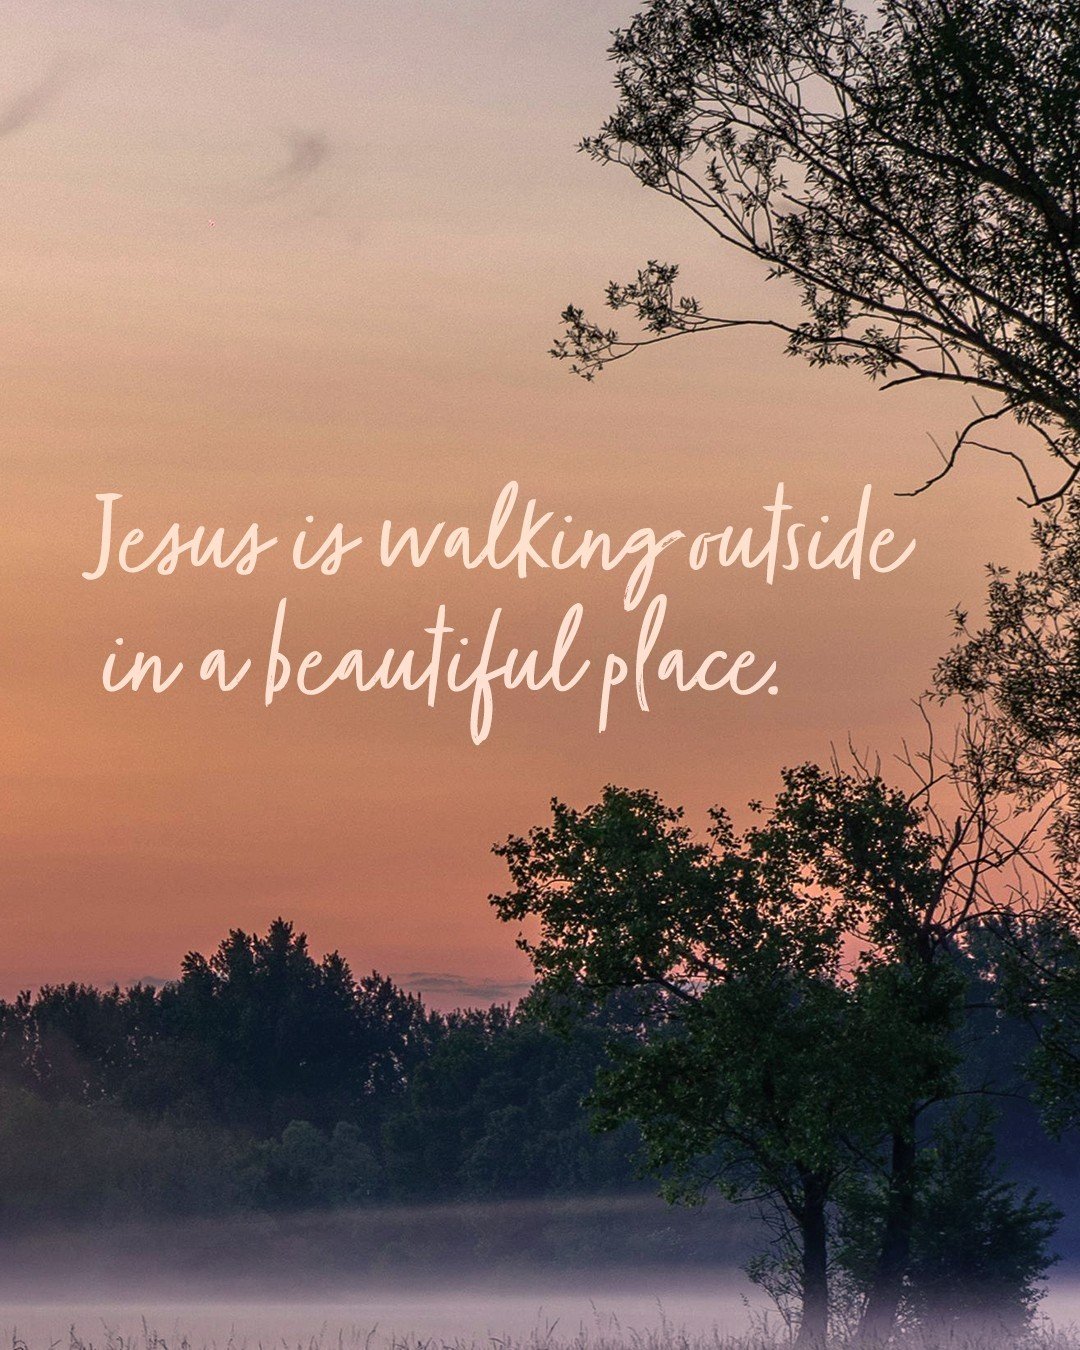 Jesus is walking outside in a beautiful place. You are with him; it&rsquo;s just the two of you together. ⁠
⁠
You walk on a dirt path. You can hear the crunch of small rocks and gravel under your feet. Tall stalks of foliage and sweet-scented flowers